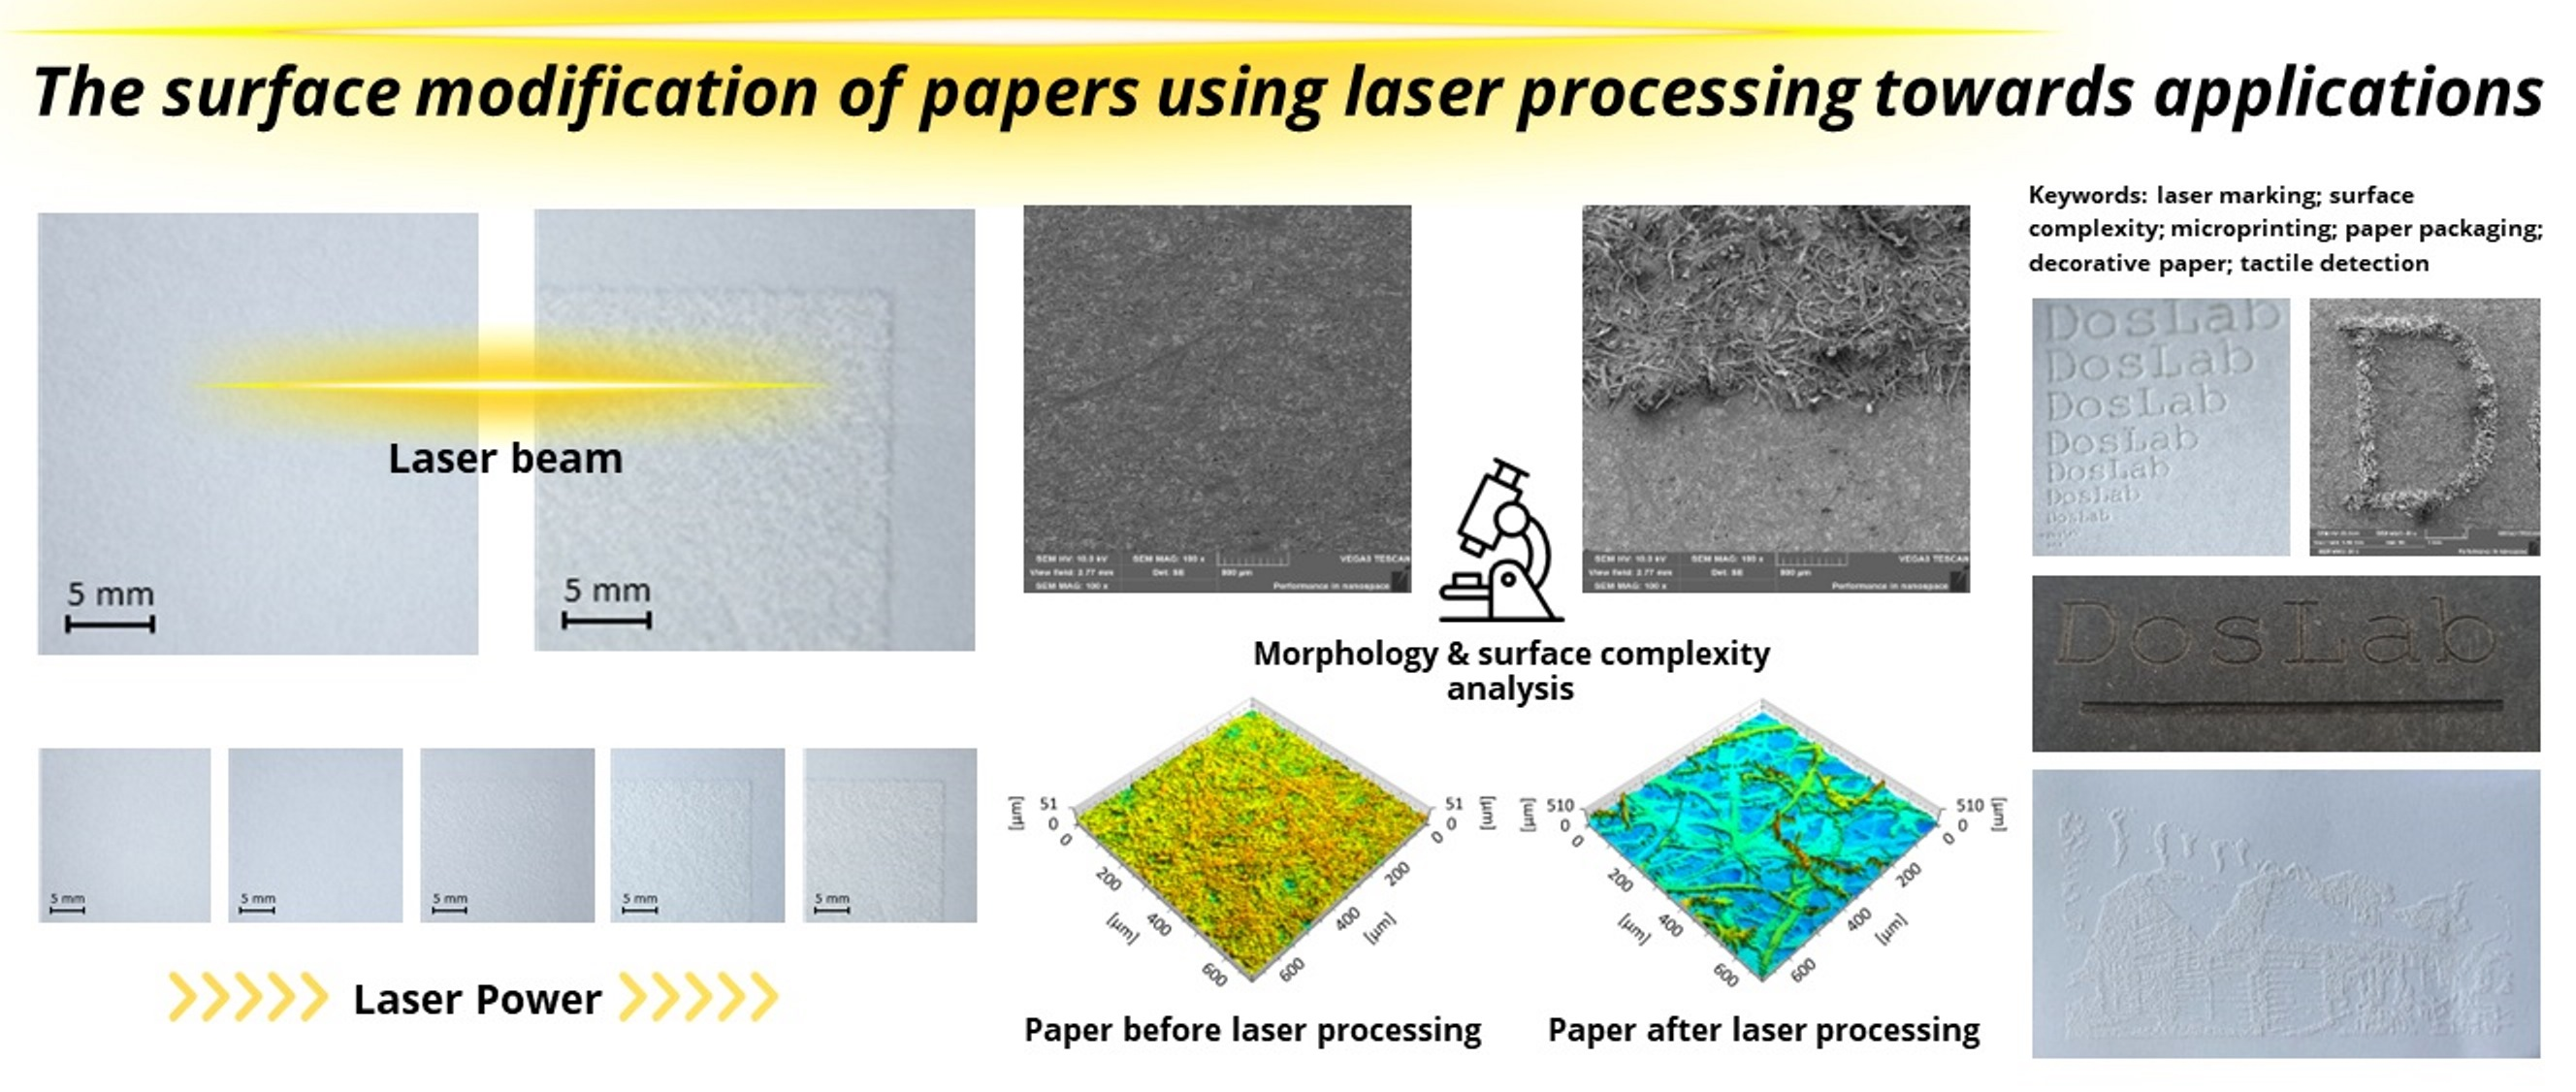 Lasering In a Material World: Paper